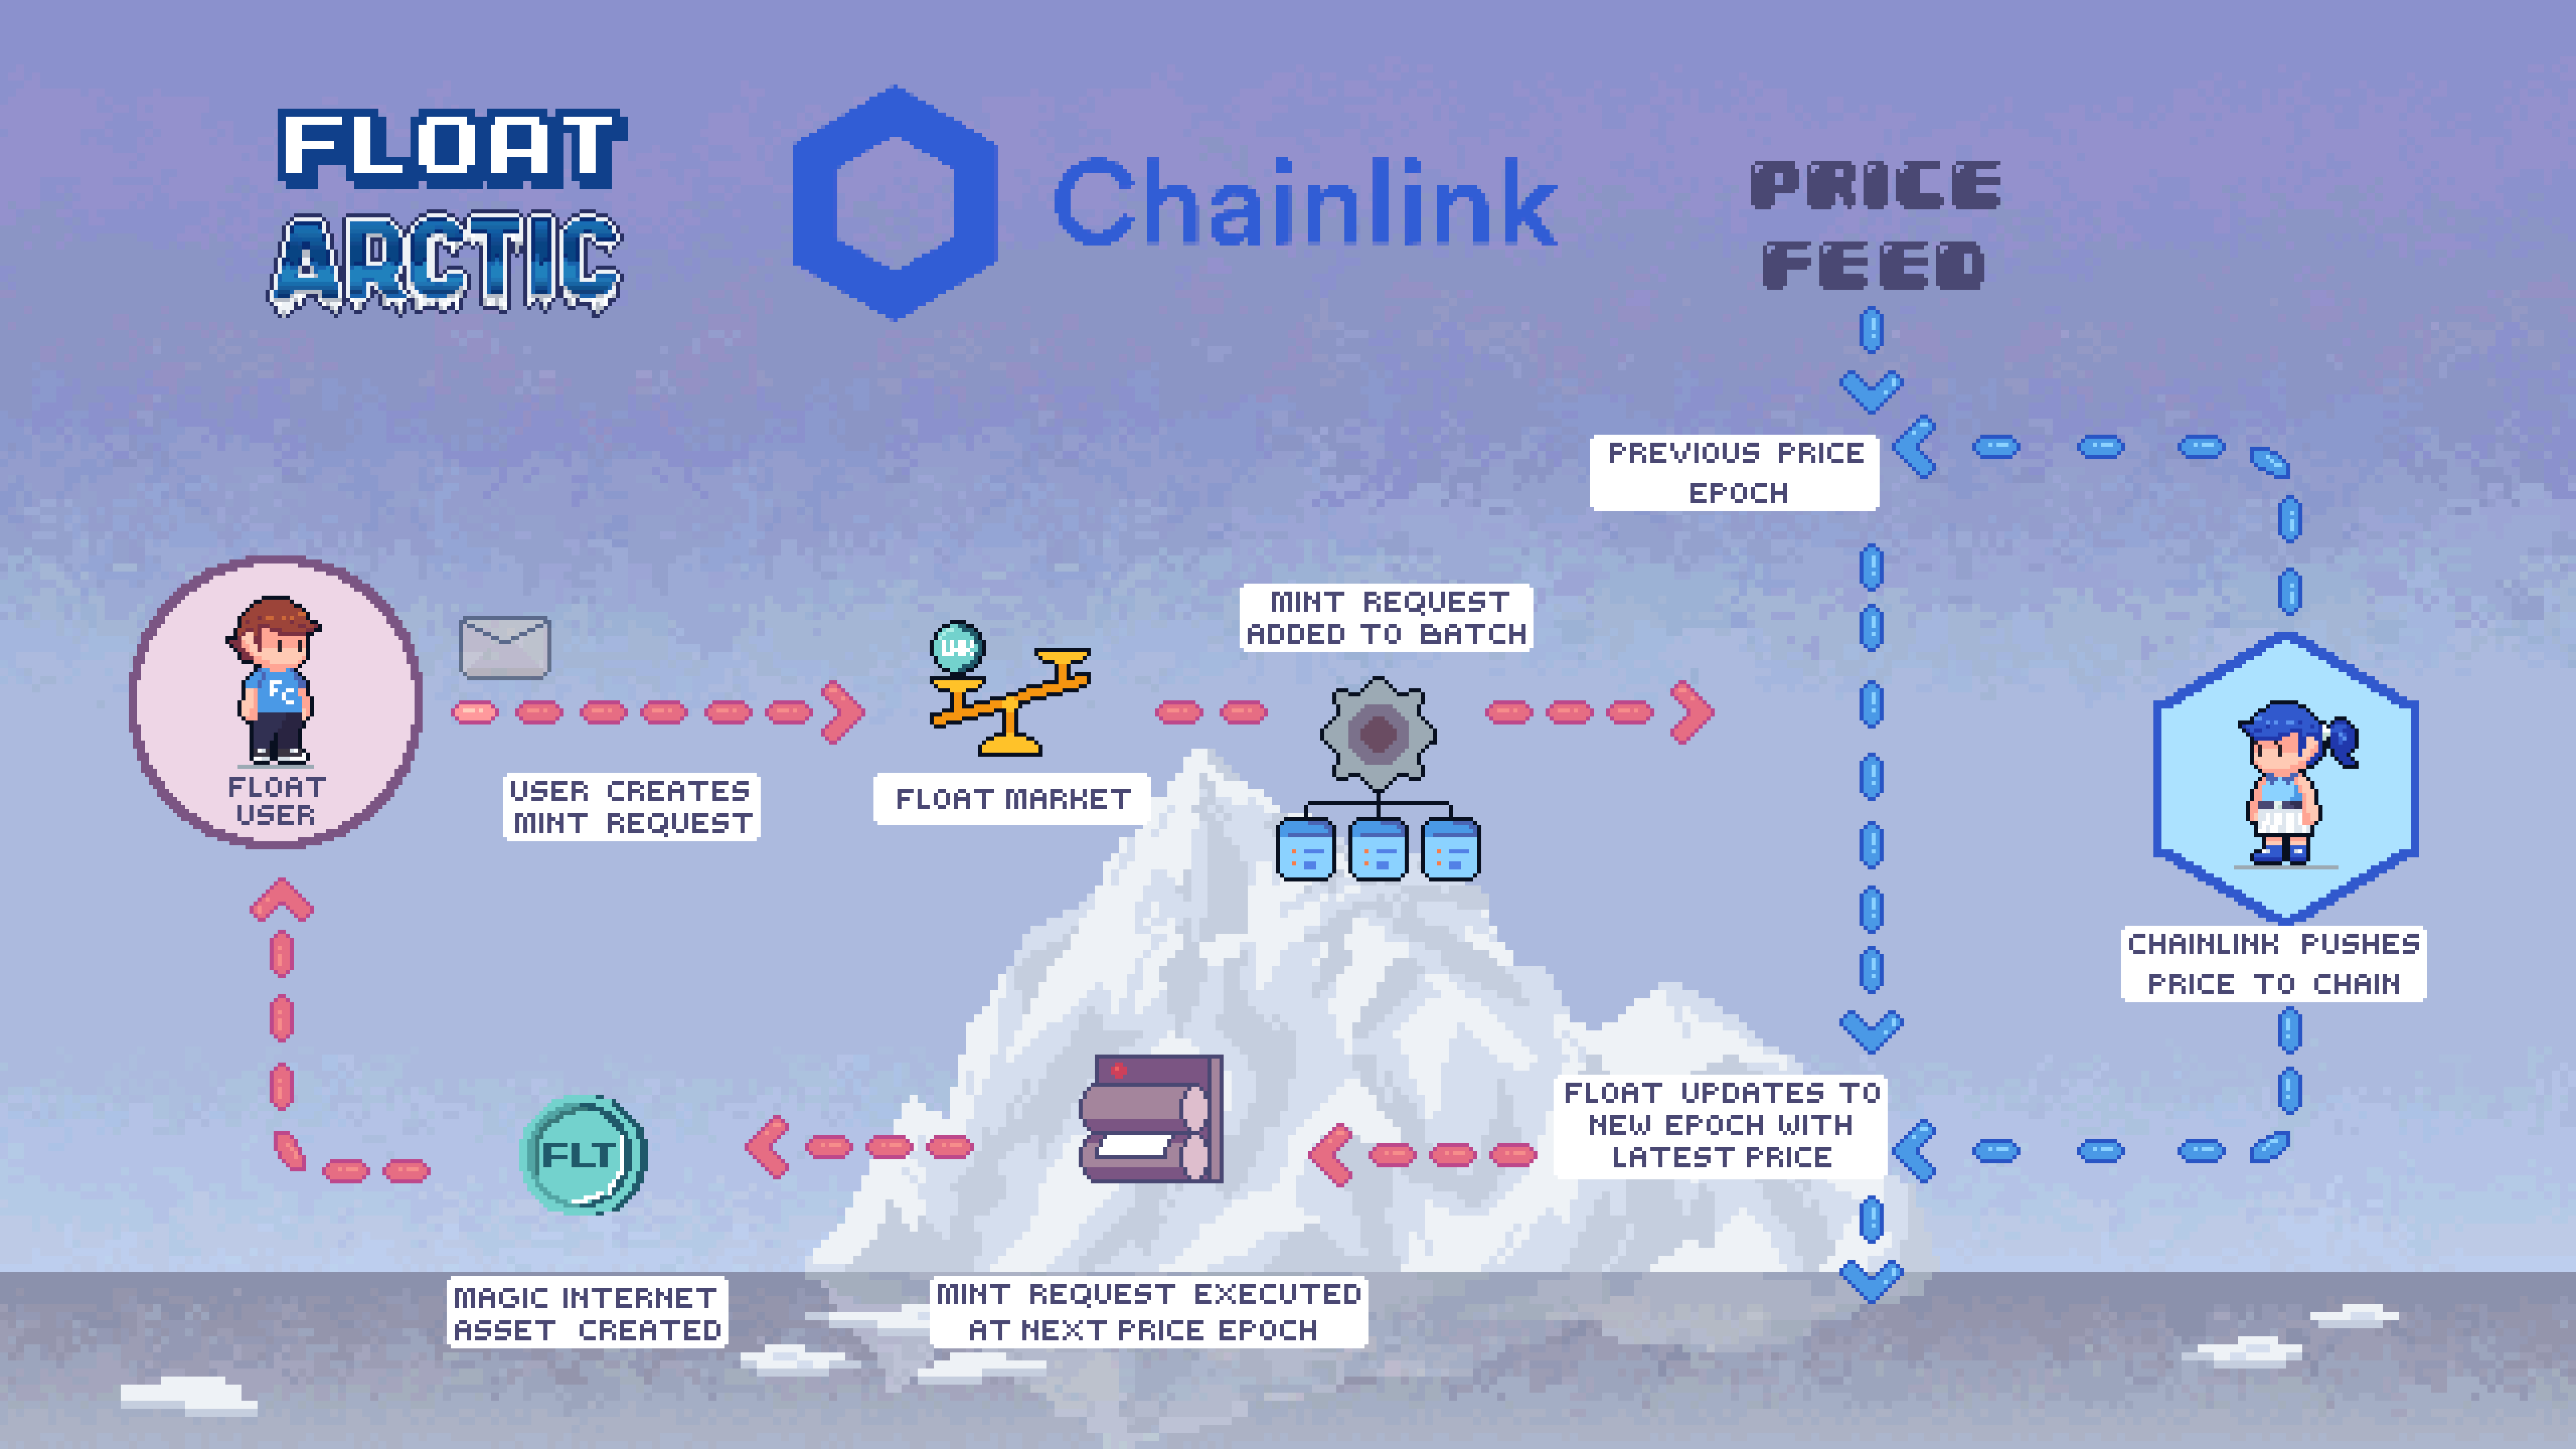 Chainlink Price Feeds Infographic